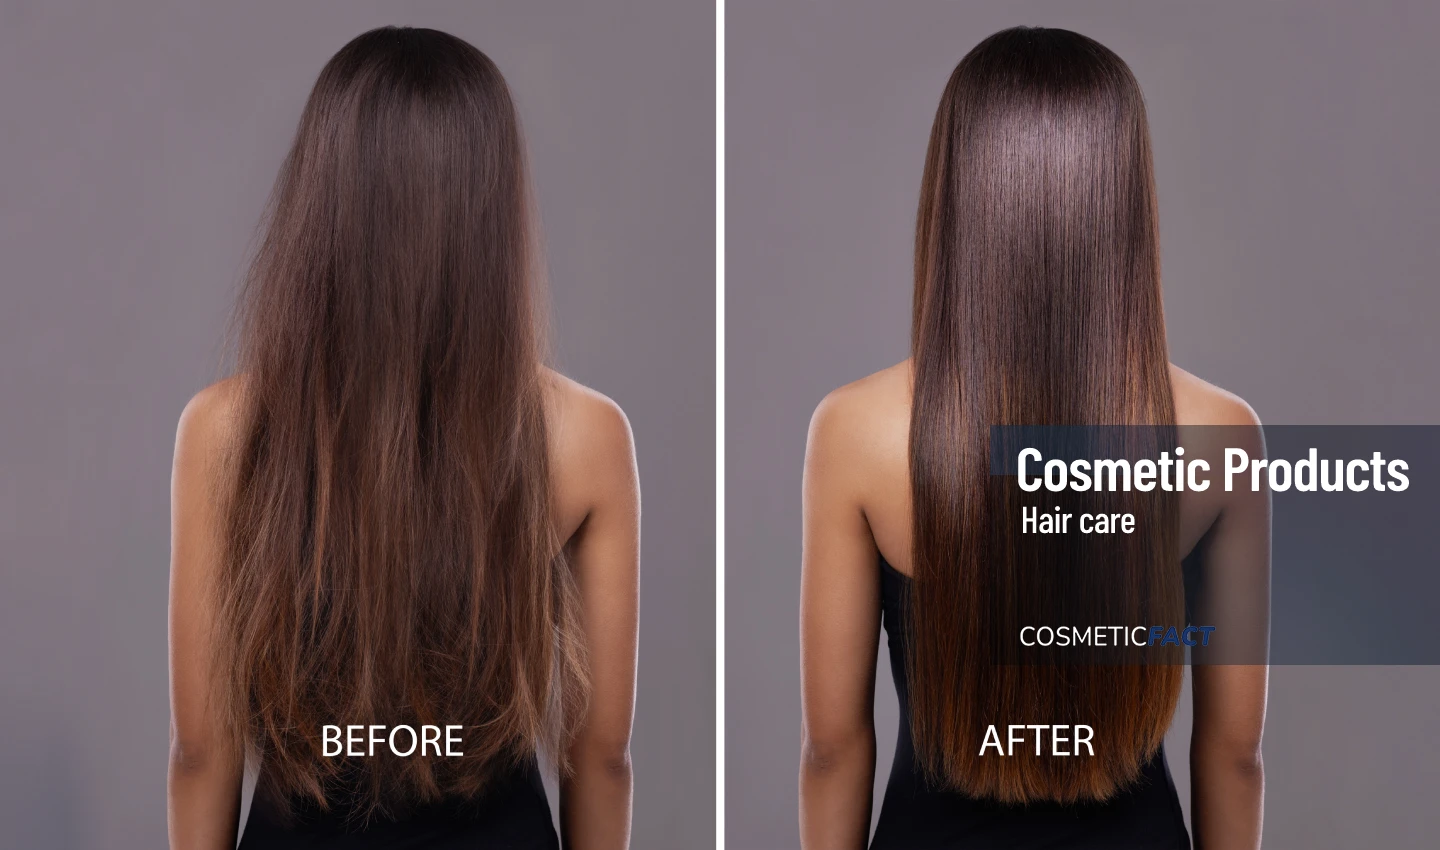 Before-and-after image showing a woman with dull hair on the left and her hair transformed into silky, shiny locks using intensive shine treatments on the right. Text reads "From Dull to Dazzling: Transform Your Hair with Intensive Shine Treatments